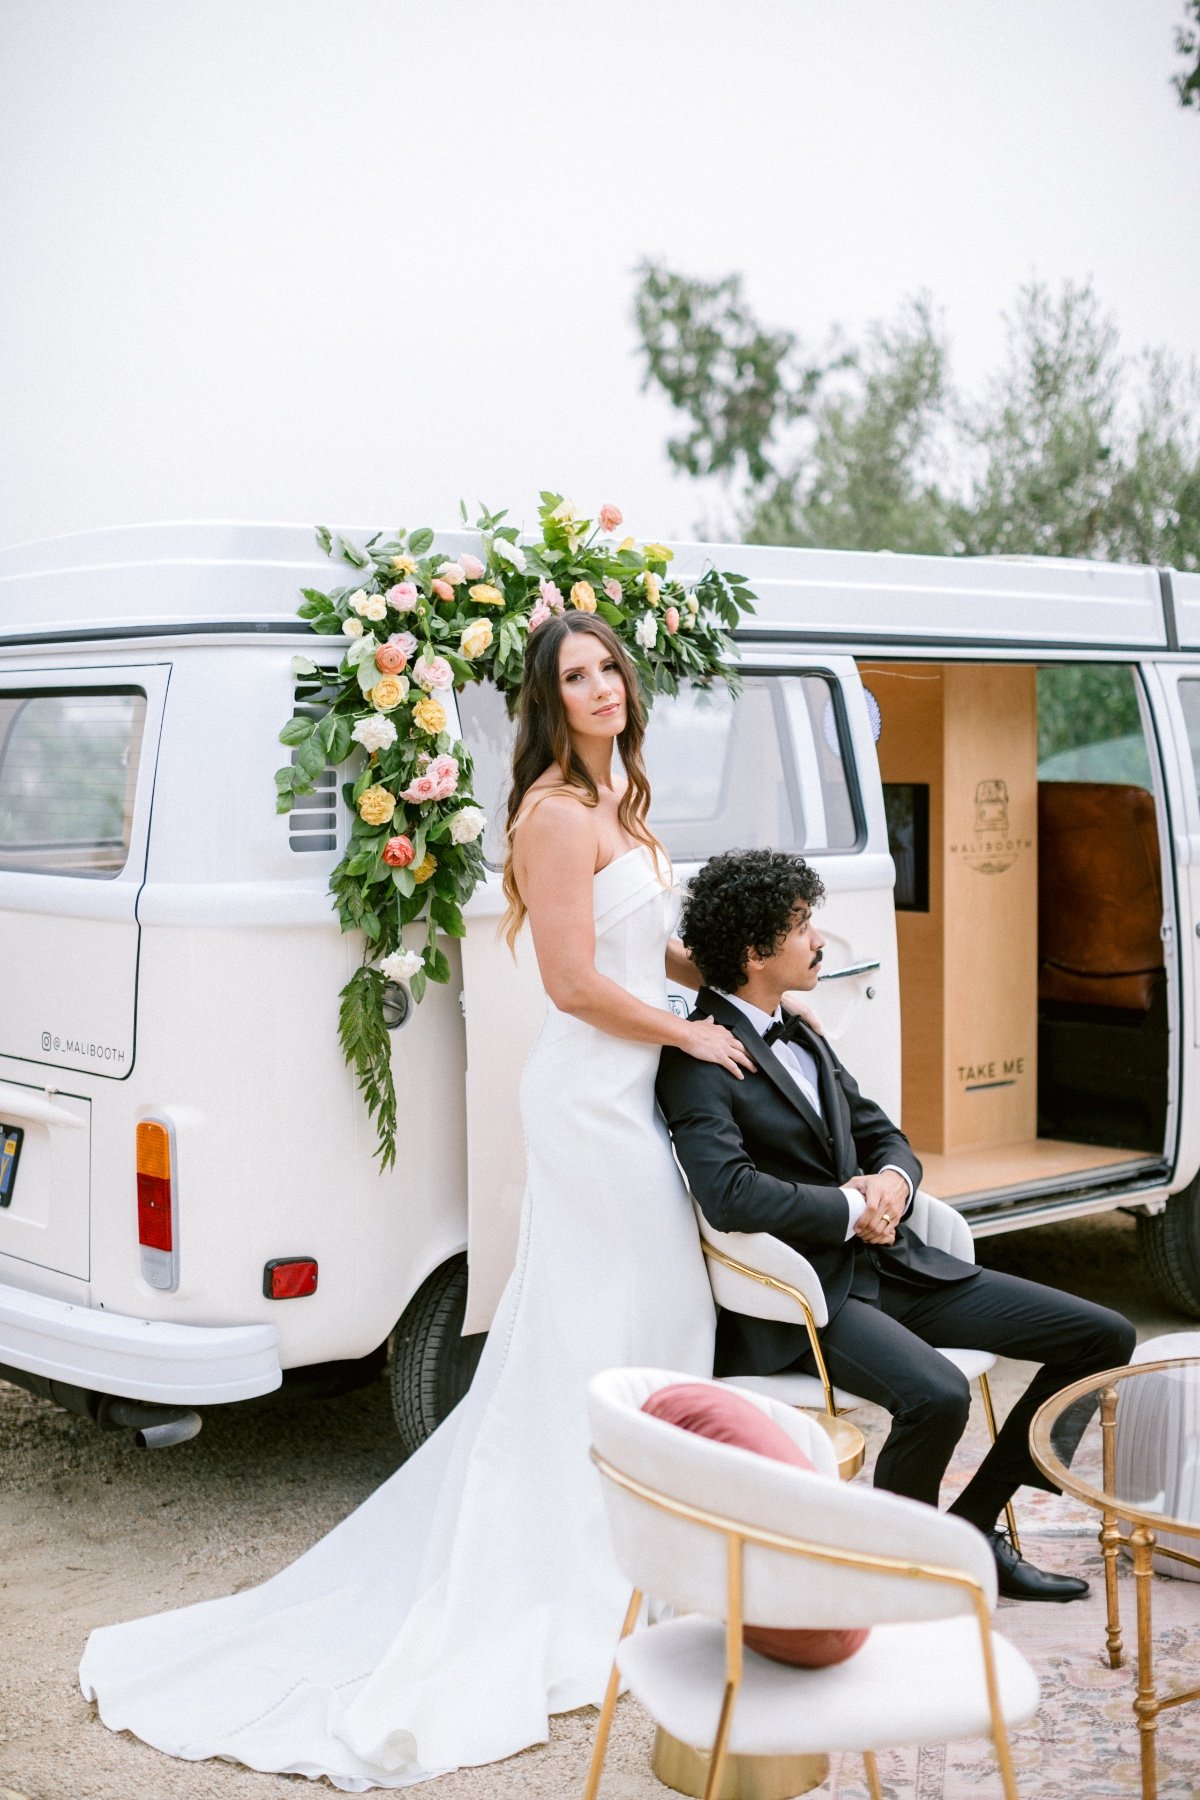 Souls and Seasons were Paired for this Santa Barbara Wedding Inspiration